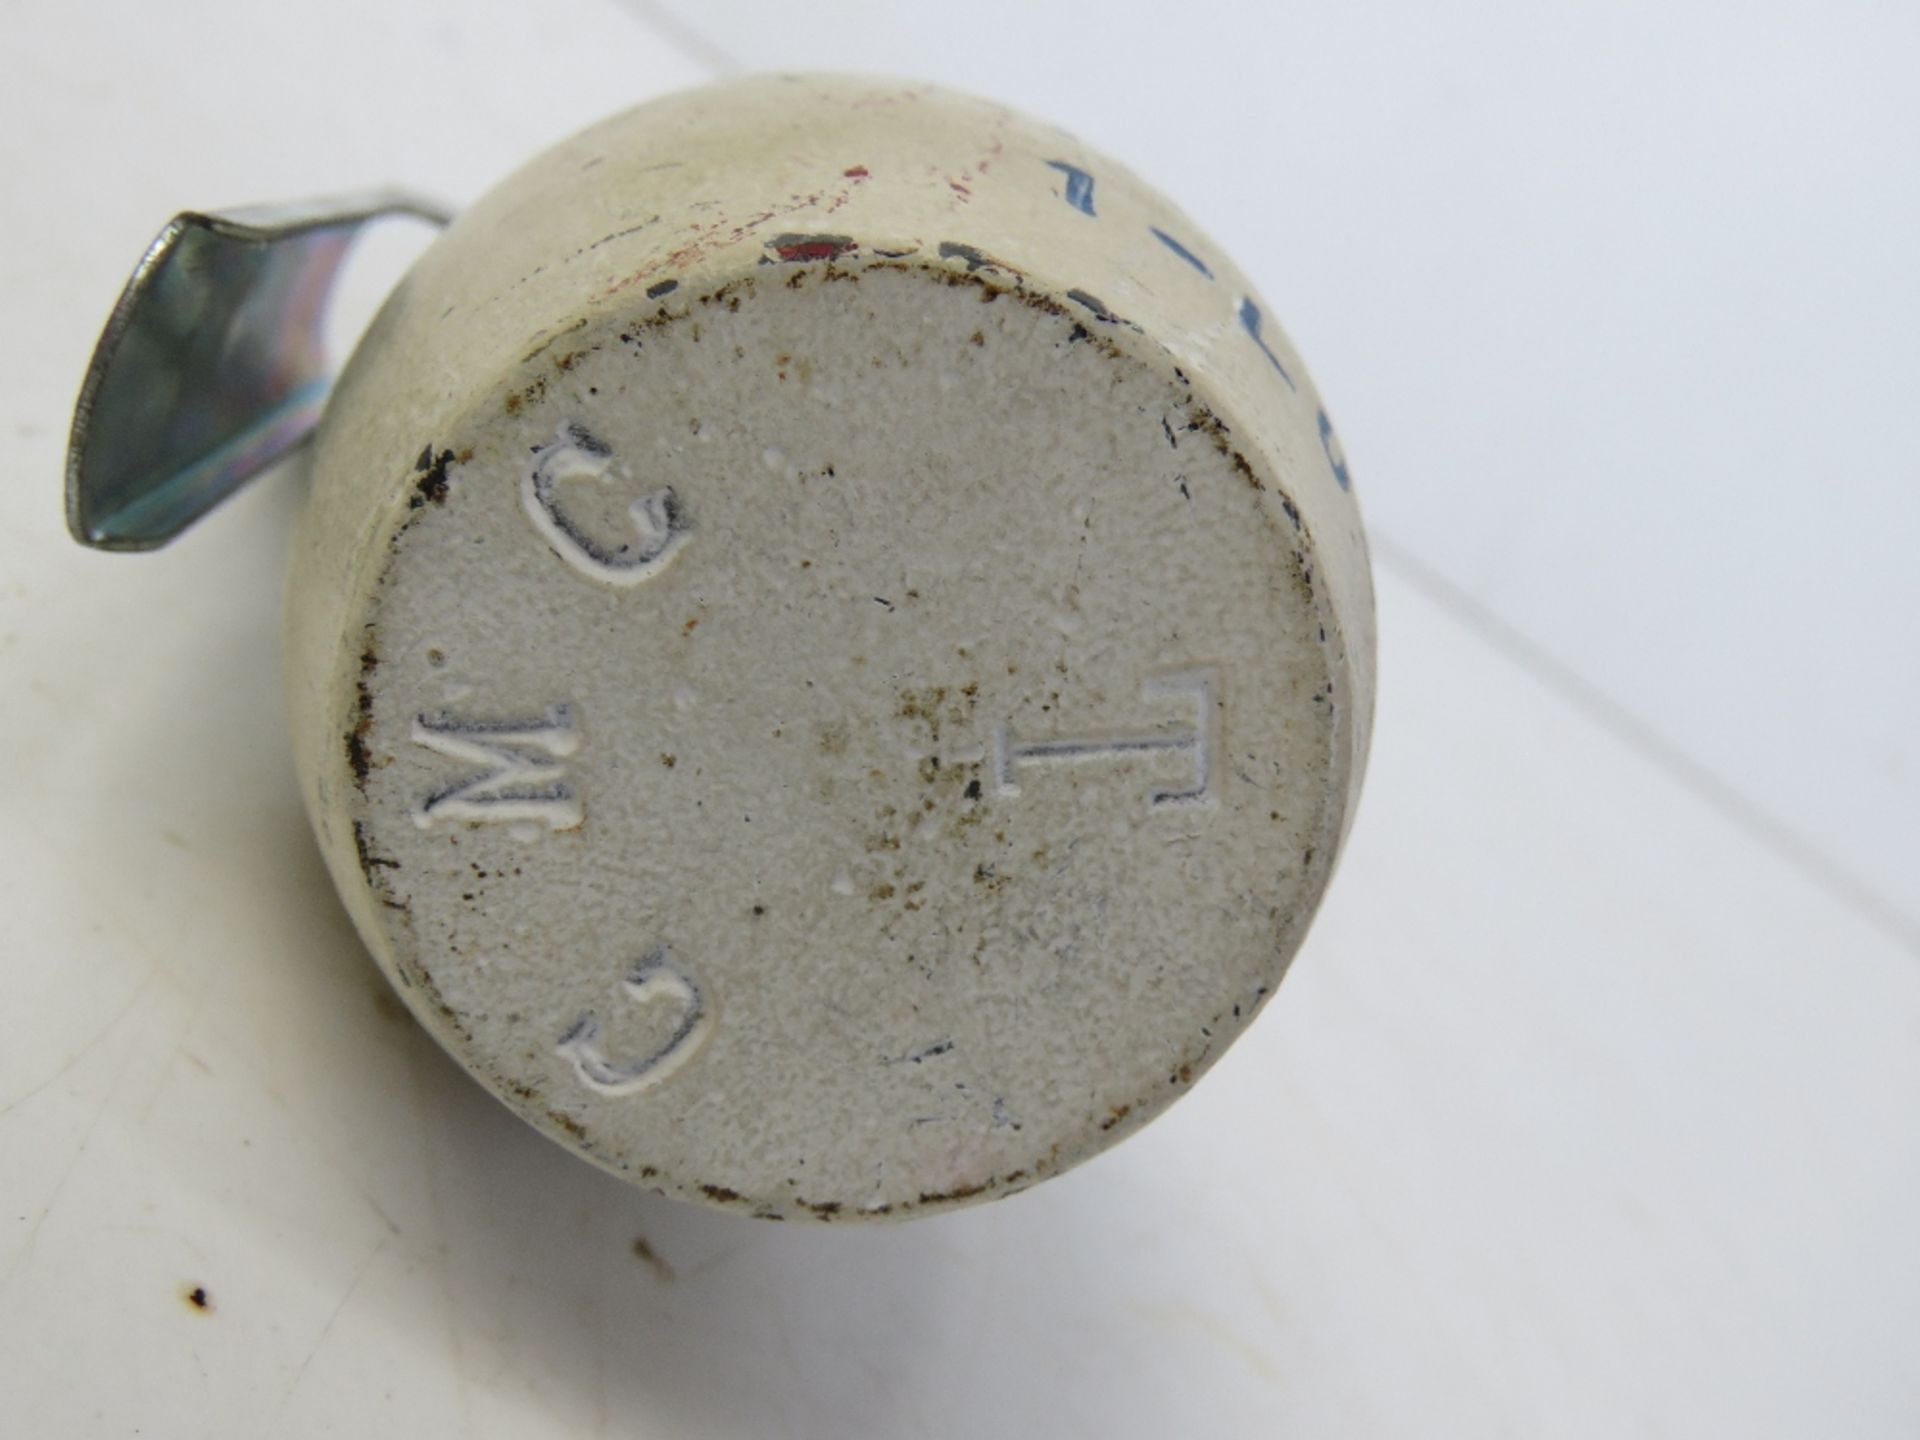 An inert French 1968 defensive grenade, dated 1968, with fuse, spoon and pin, - Image 2 of 3